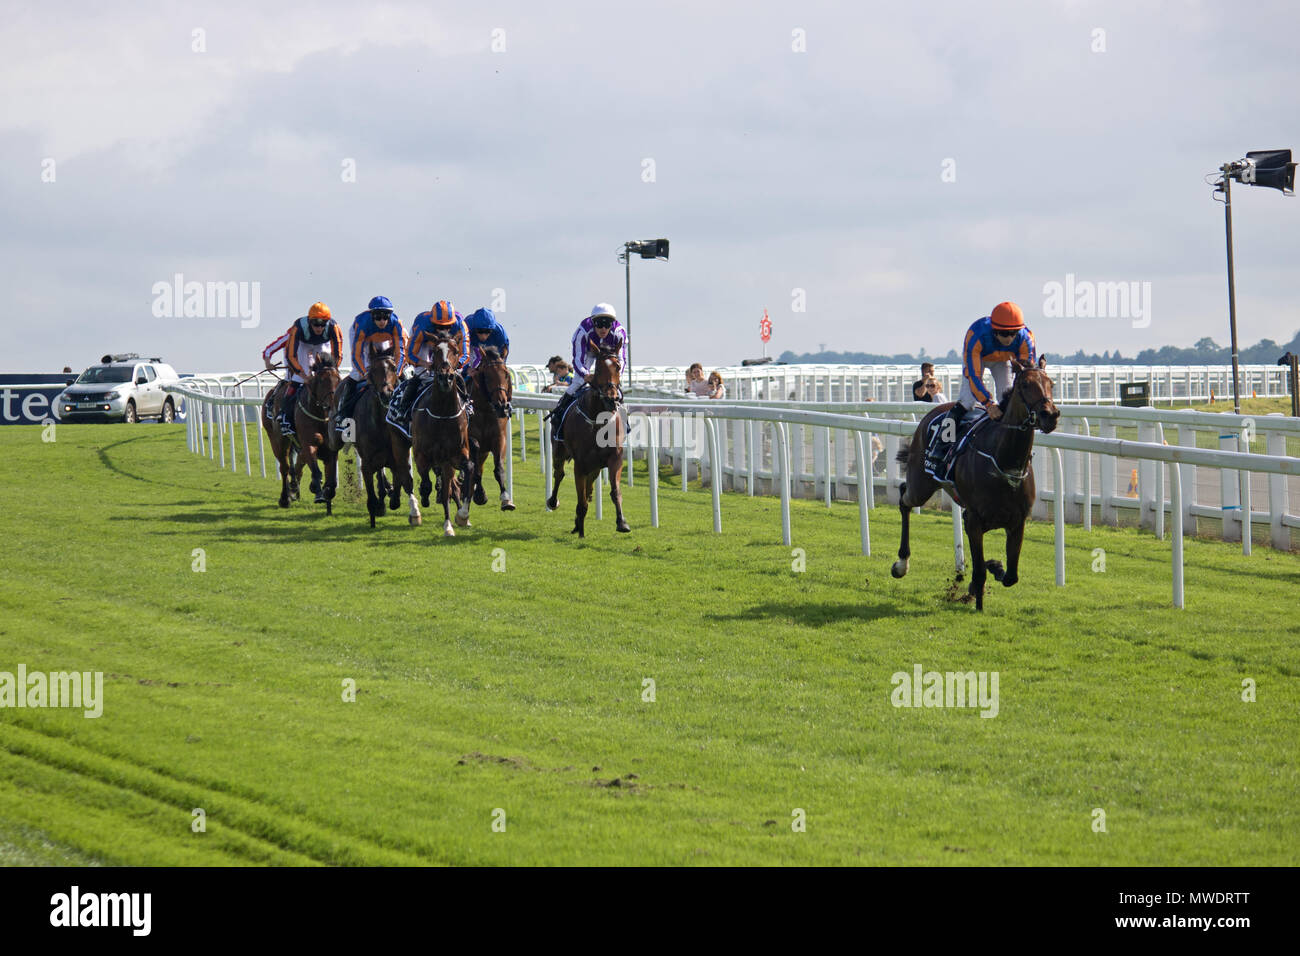 Epsom Downs Surrey UK. 1st June 2018. The Oaks at Epsom Downs. No1 Bye Bye Baby leads the field with five furlongs to go. Eventual winner Forever Together is mid placed. Credit: Julia Gavin/Alamy Live News Stock Photo